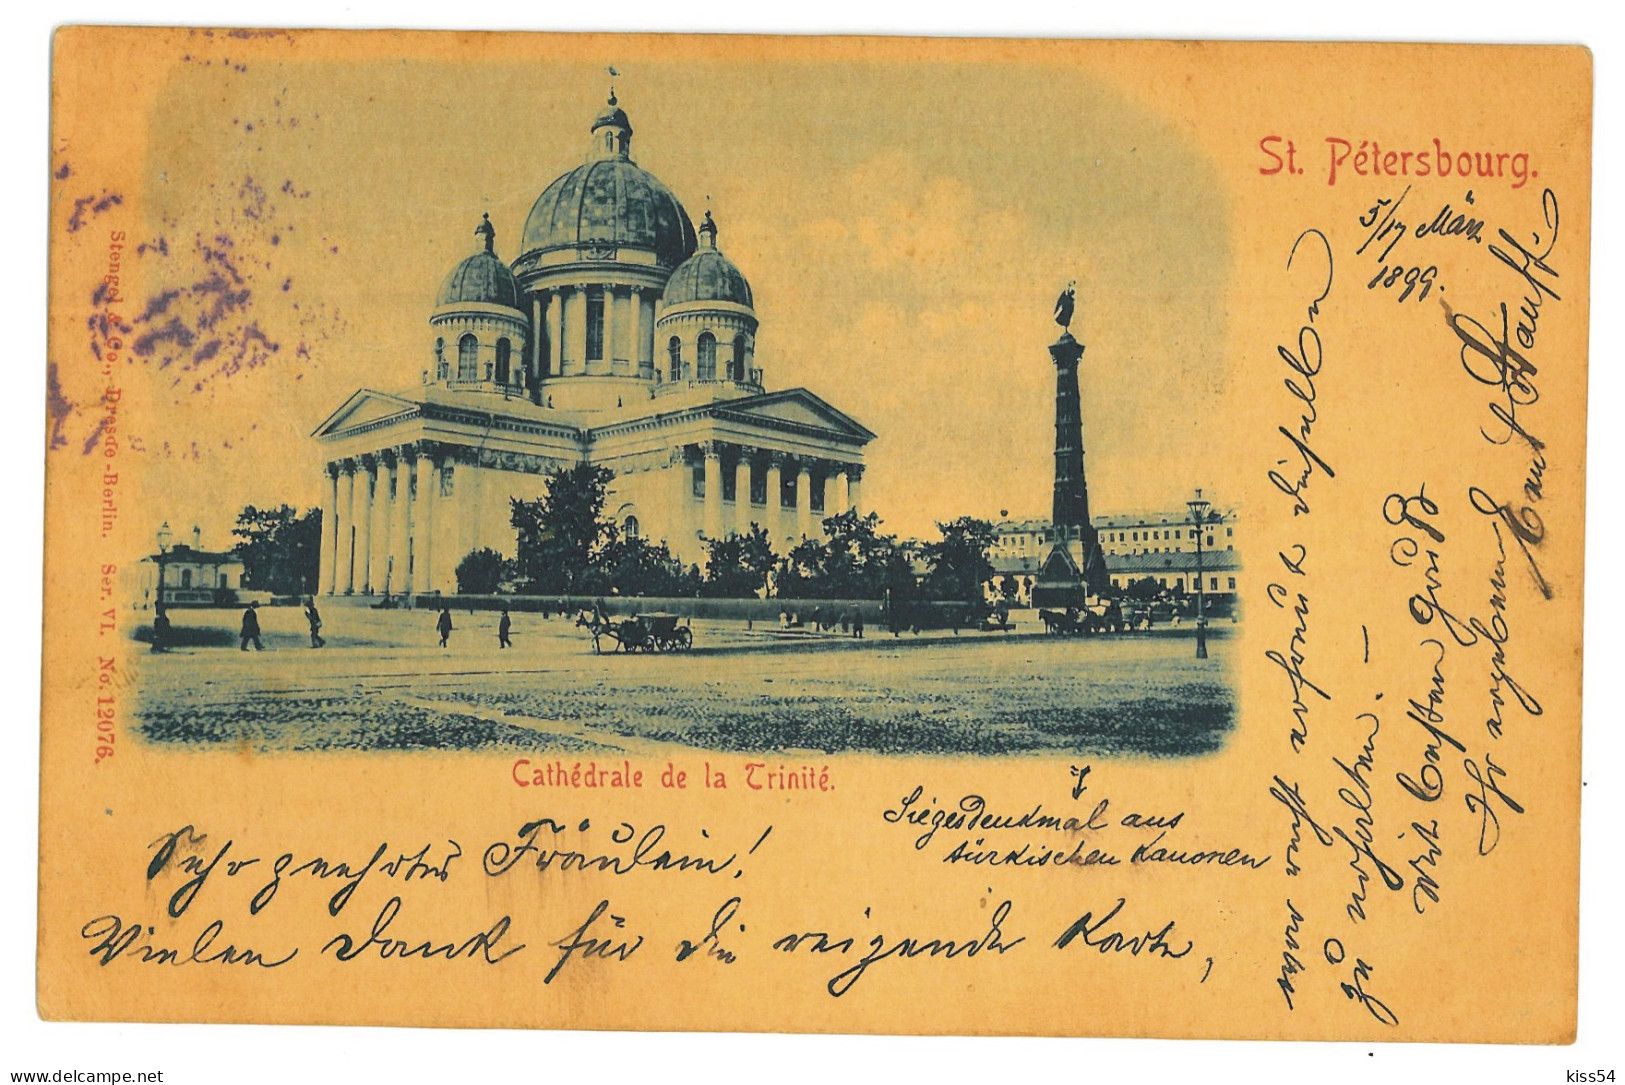 RUS 48 - 23749 SAINT PETERSBURG, Cathedral, Litho, Russia - Old Postcard - Used - 1899 - Rusland